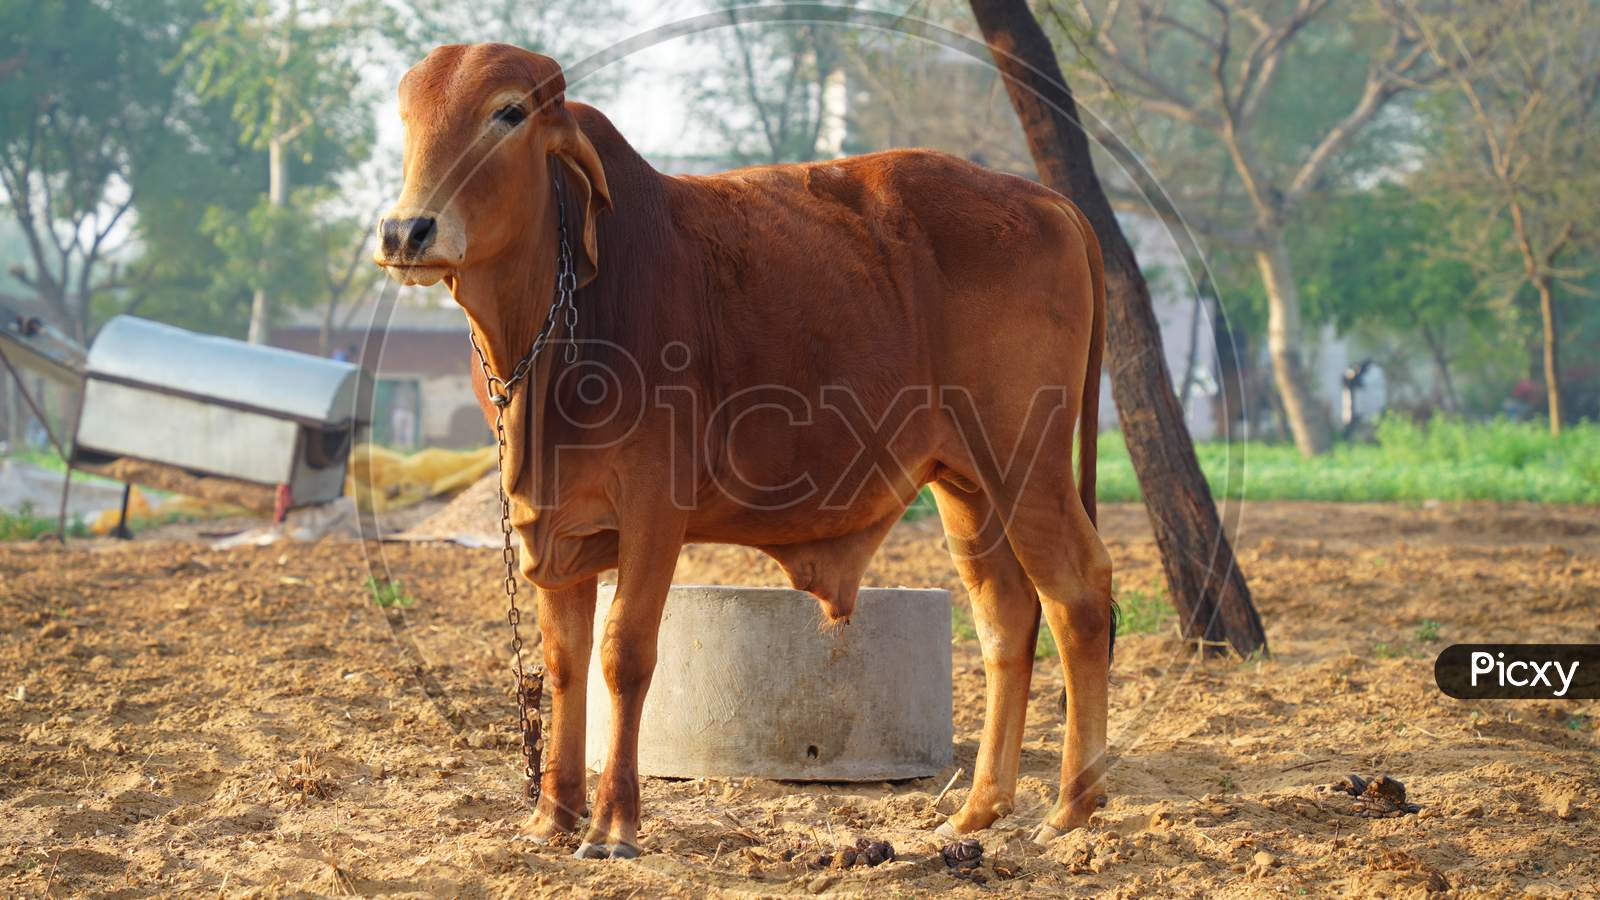 Bull In The Rest Position After Plowing The Field. Indian Bull Shaking Sunlight In Winter Season.